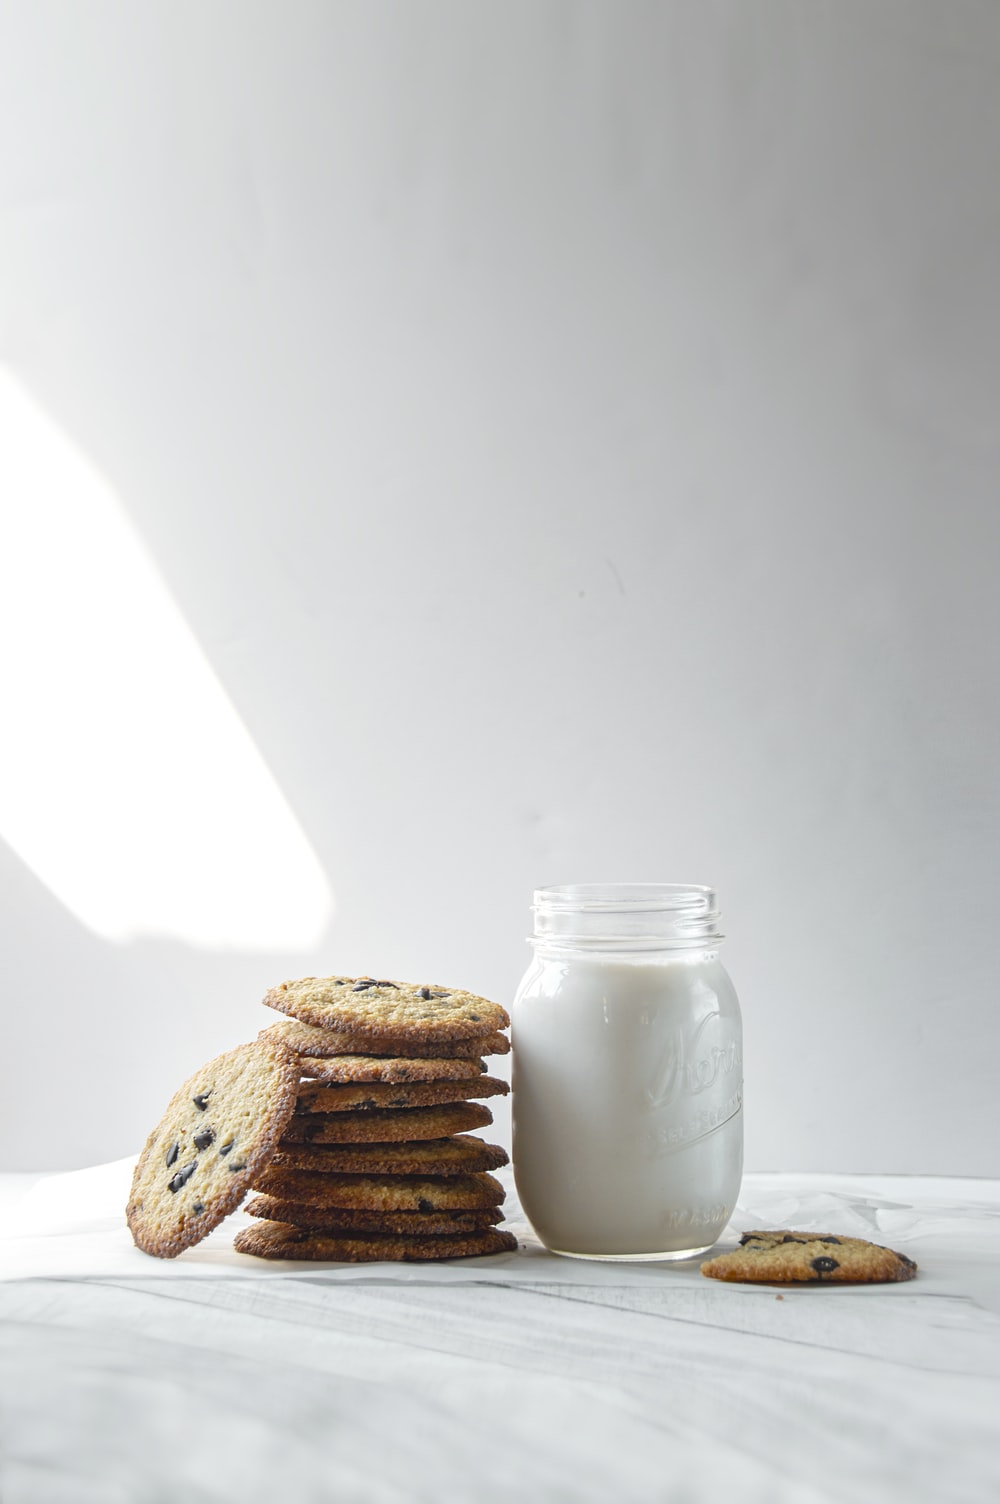 Cookies And Milk Picture. Download Free Image